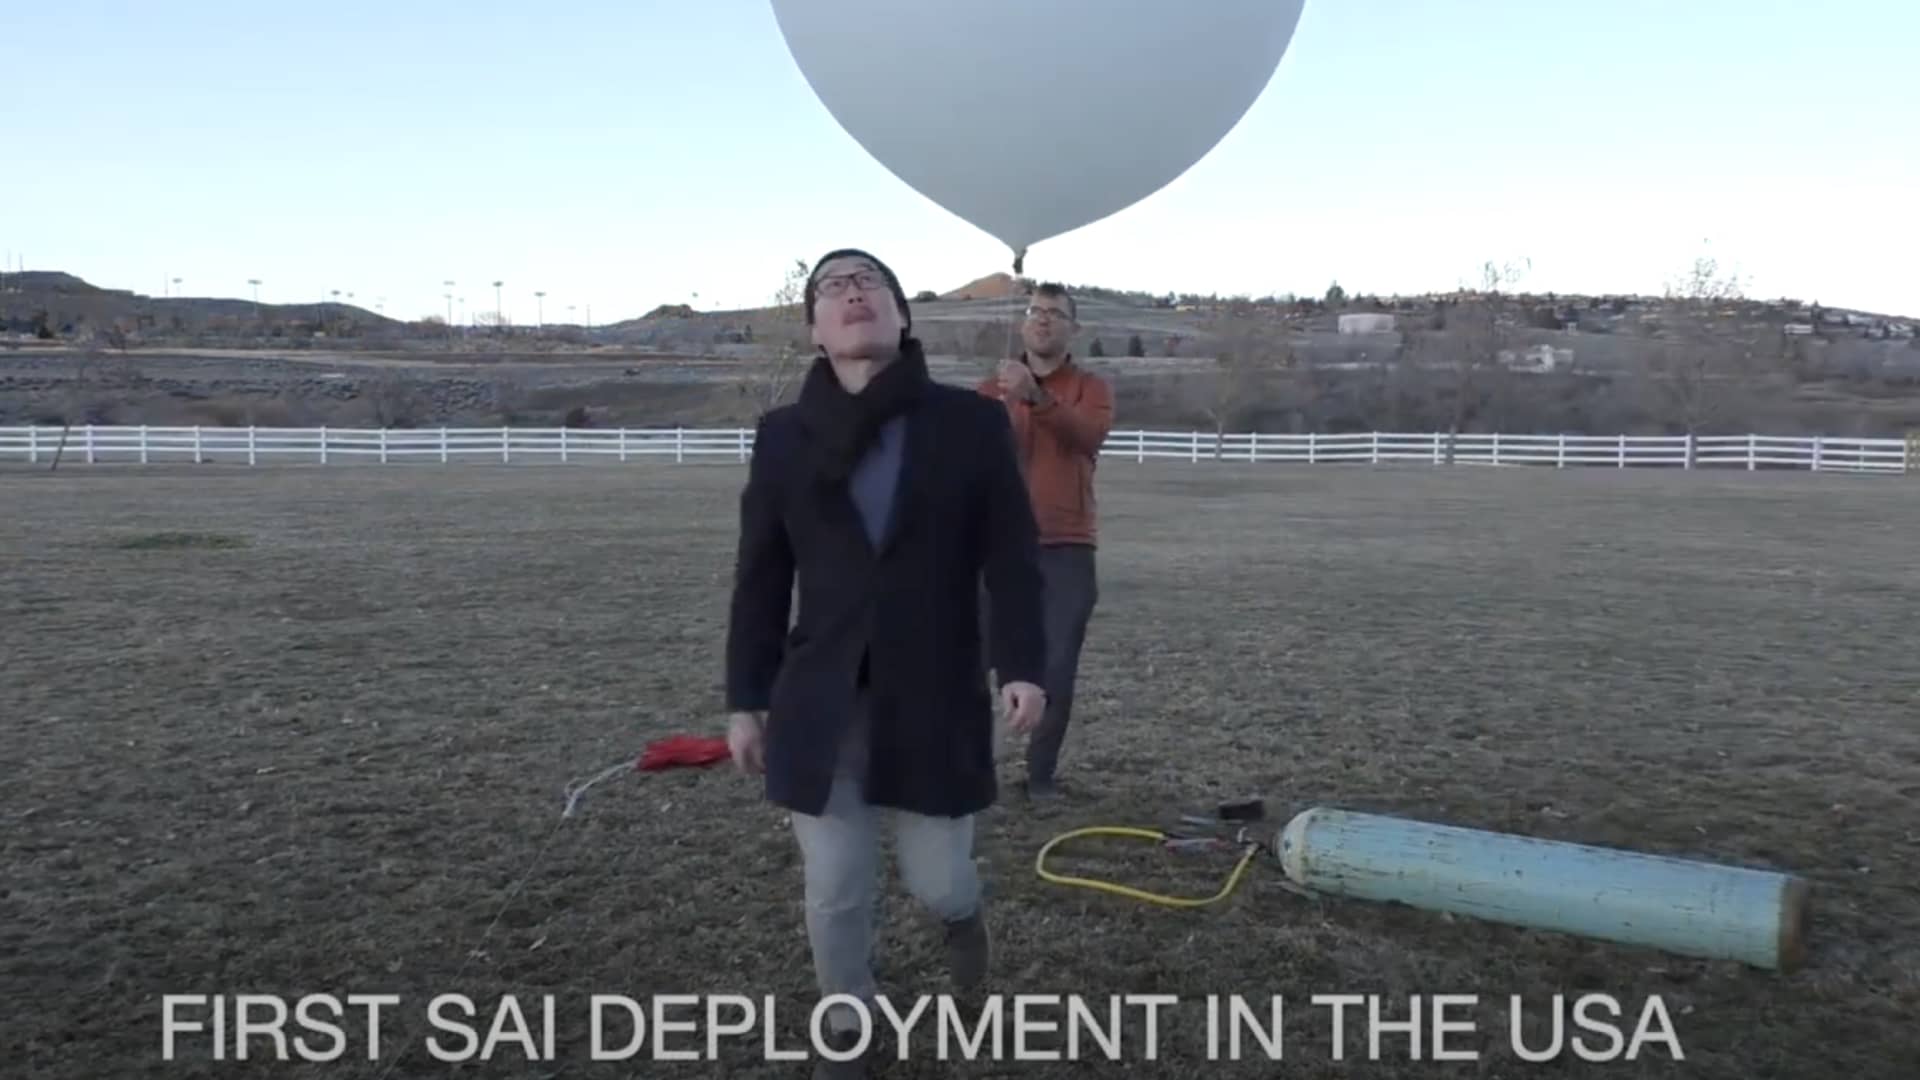 Here, founder Luke Iseman is preparing to release the weather balloon filled with sulfur dioxide and helium into the atmosphere. Make Sunsets says this is the first deployment of SAI, or stratospheric aerosol injection, another and more specific name for solar geoengineering.